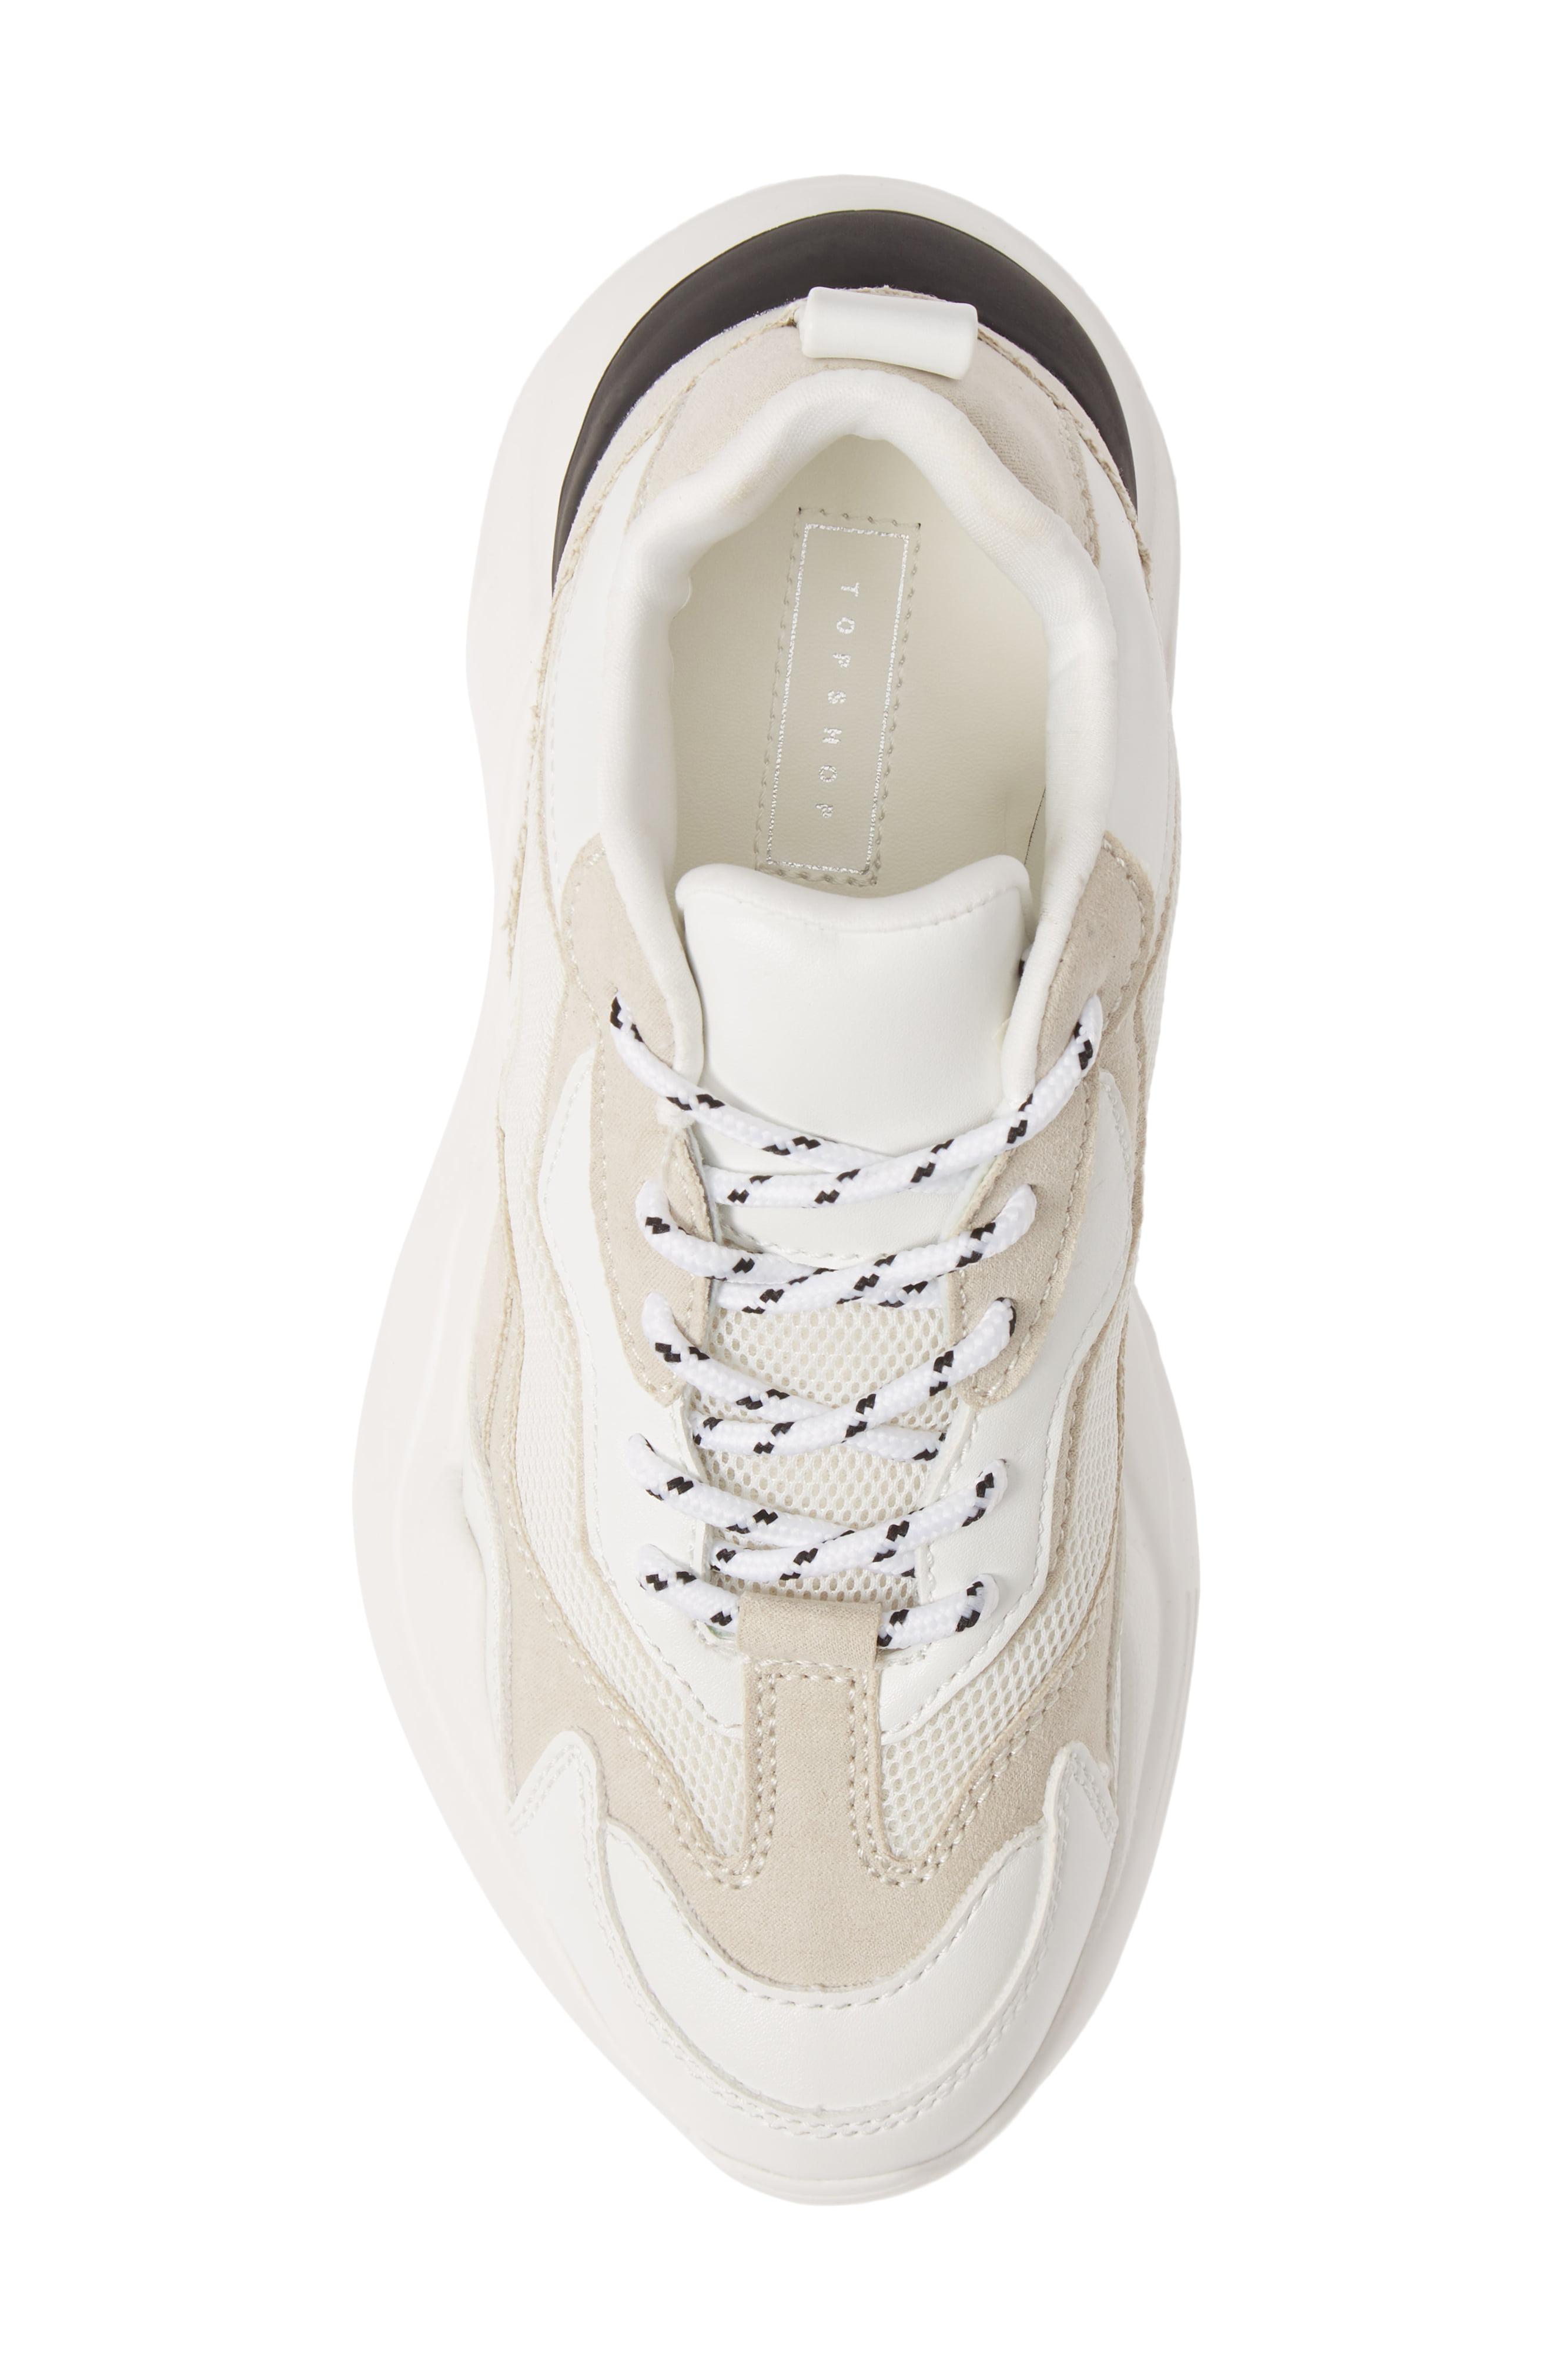 TOPSHOP Cancun Chunky Sneakers in White | Lyst